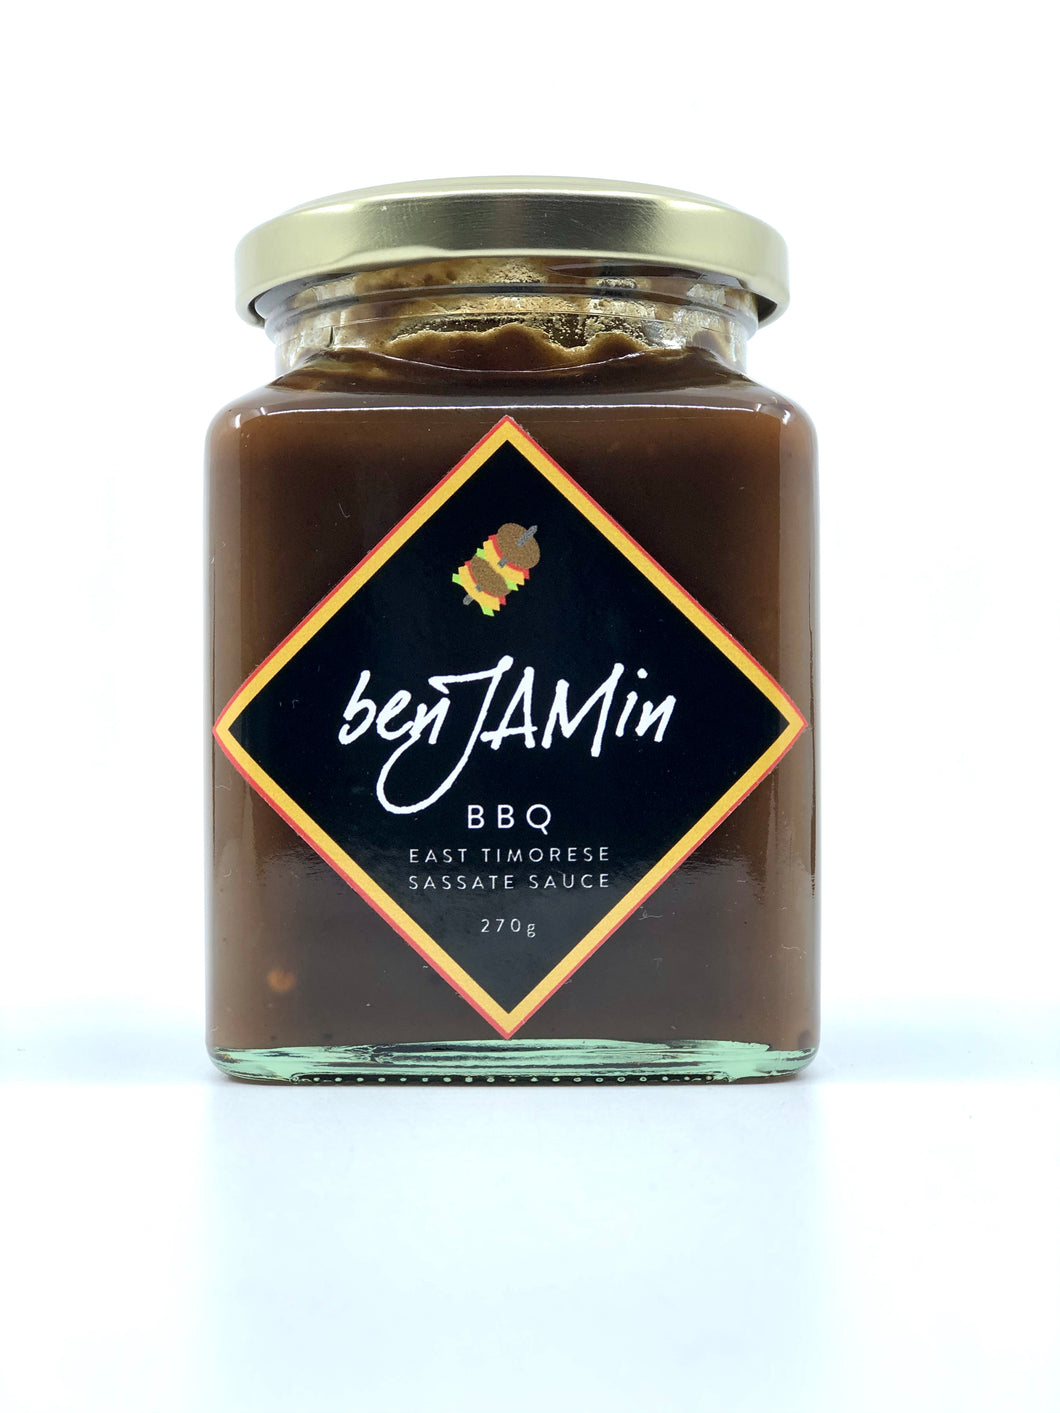 East Timorese BBQ Sauce